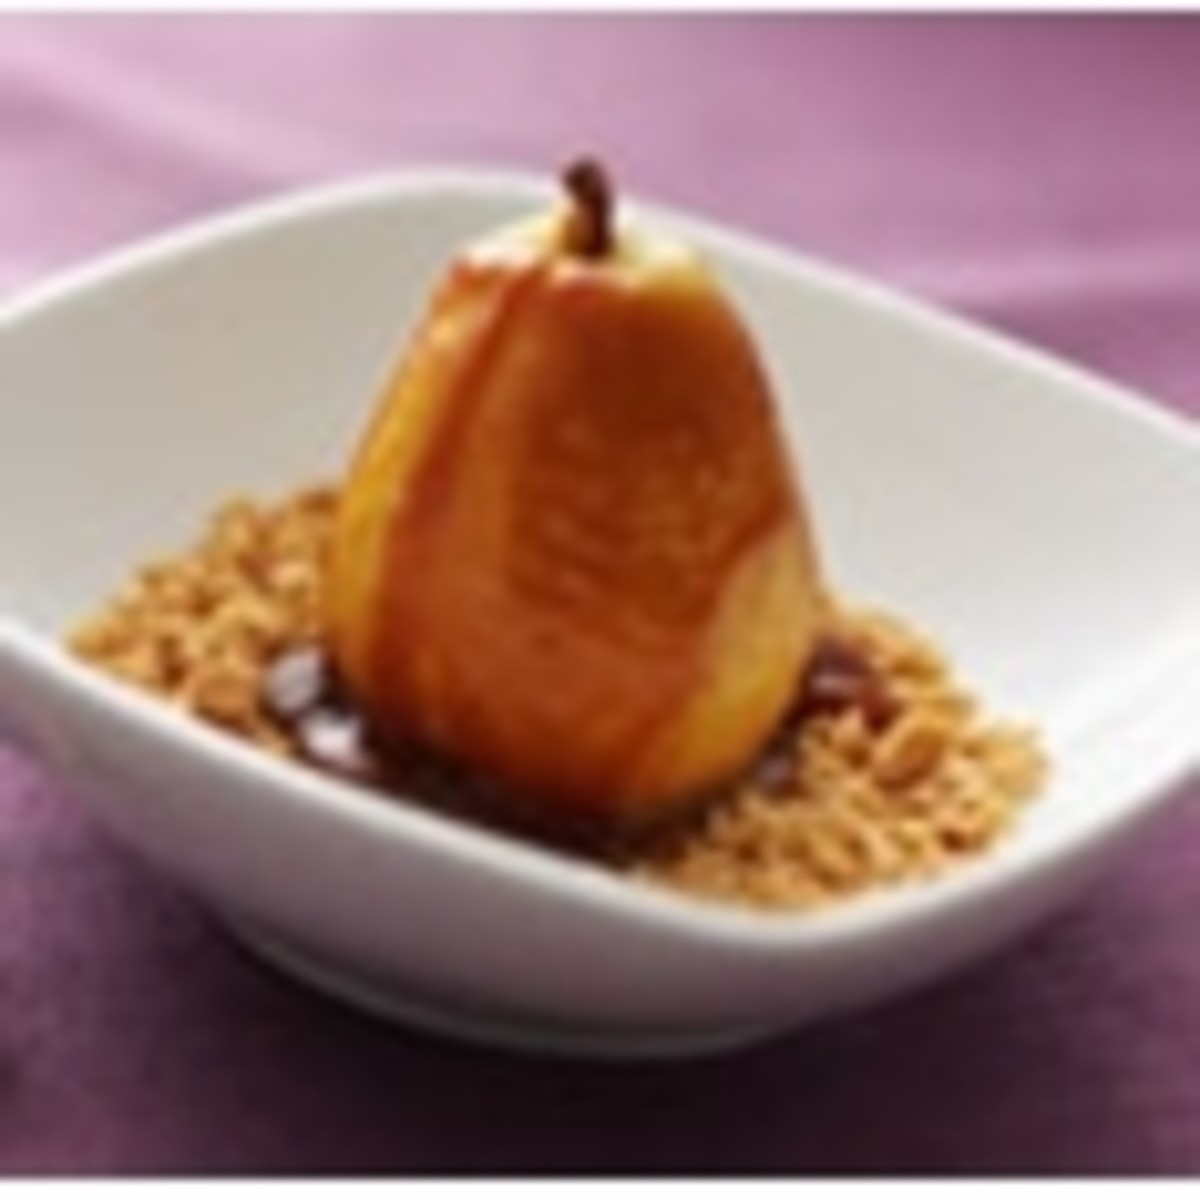 Poached Pears with Vanilla Caramel Sauce and Toasted Peanuts